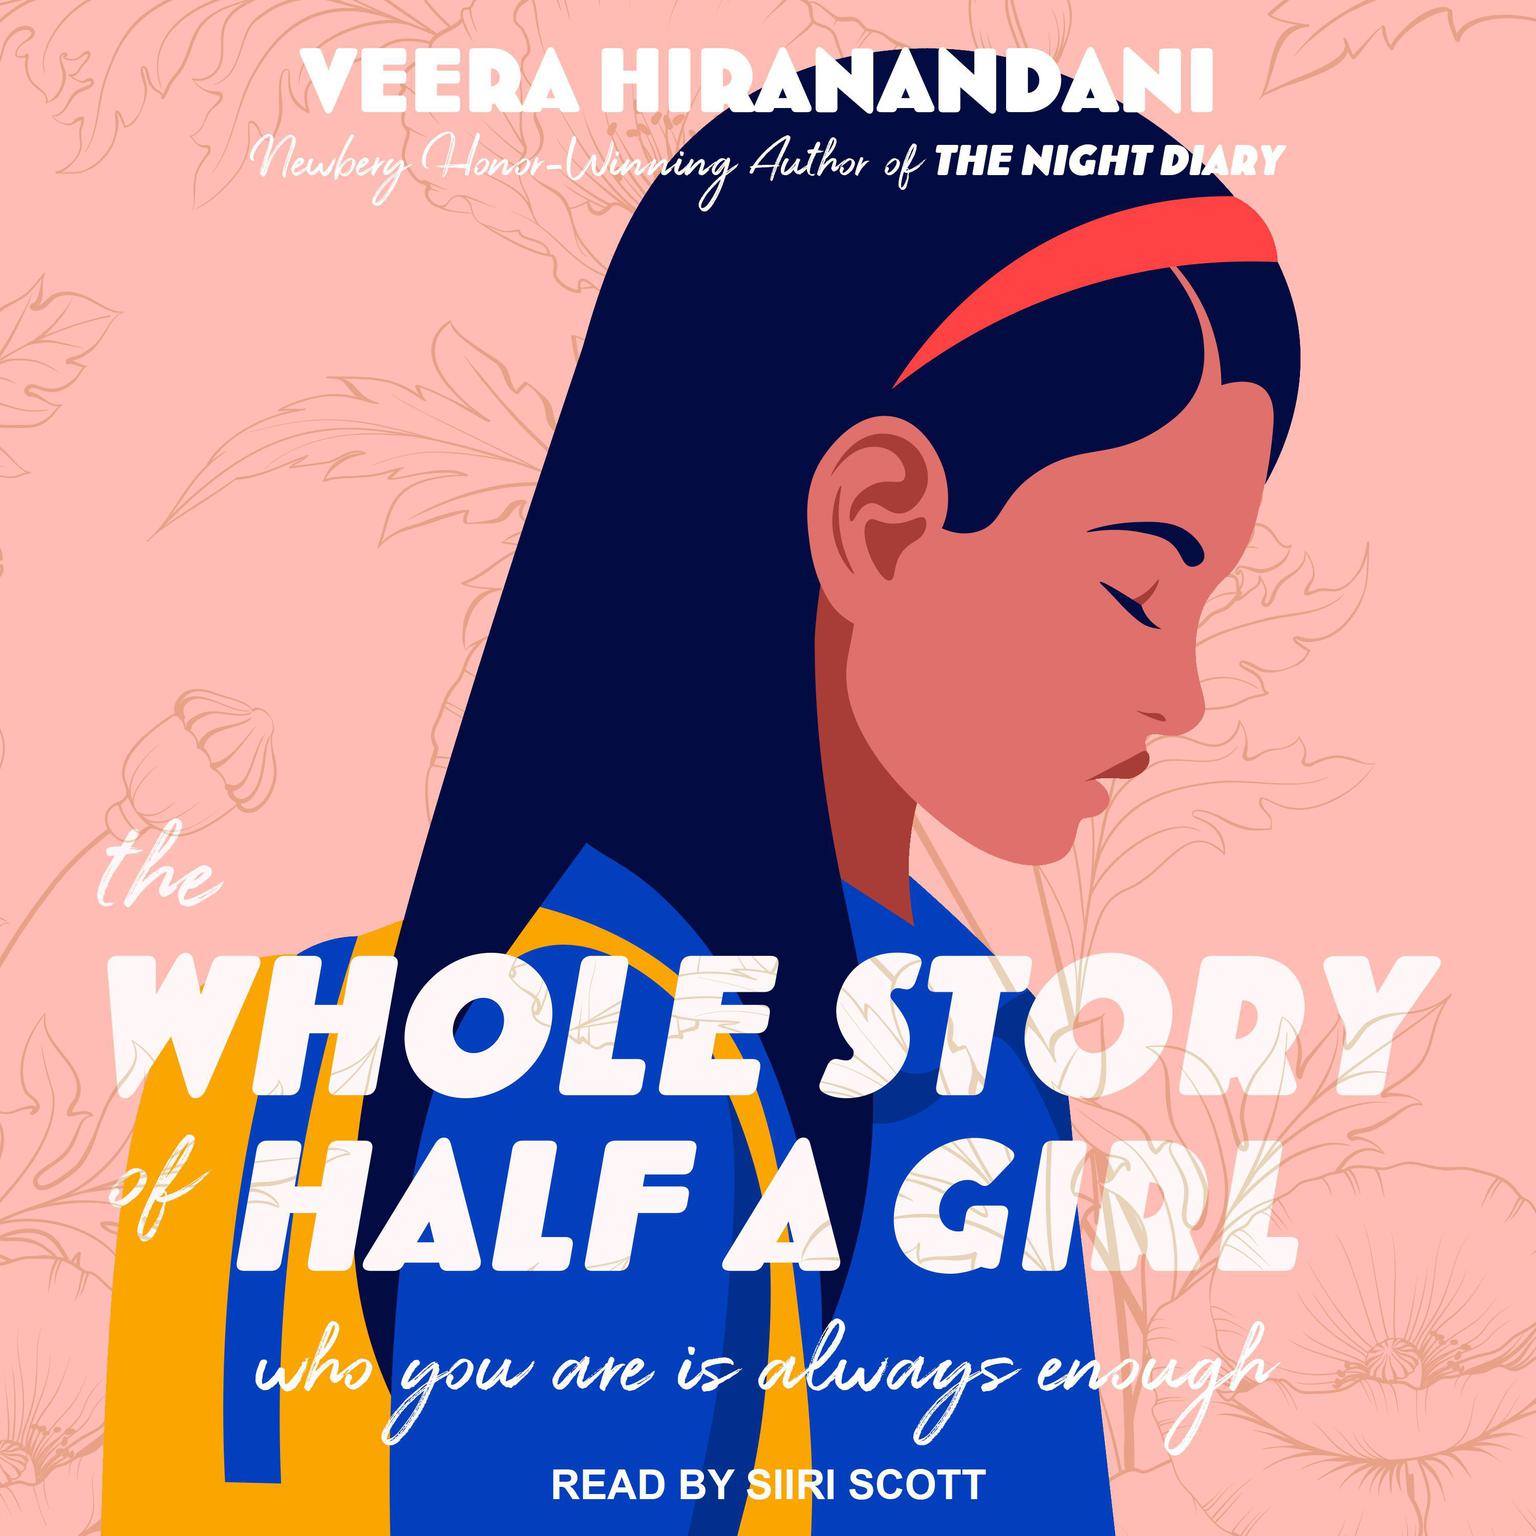 The Whole Story of Half a Girl Audiobook, by Veera Hiranandani